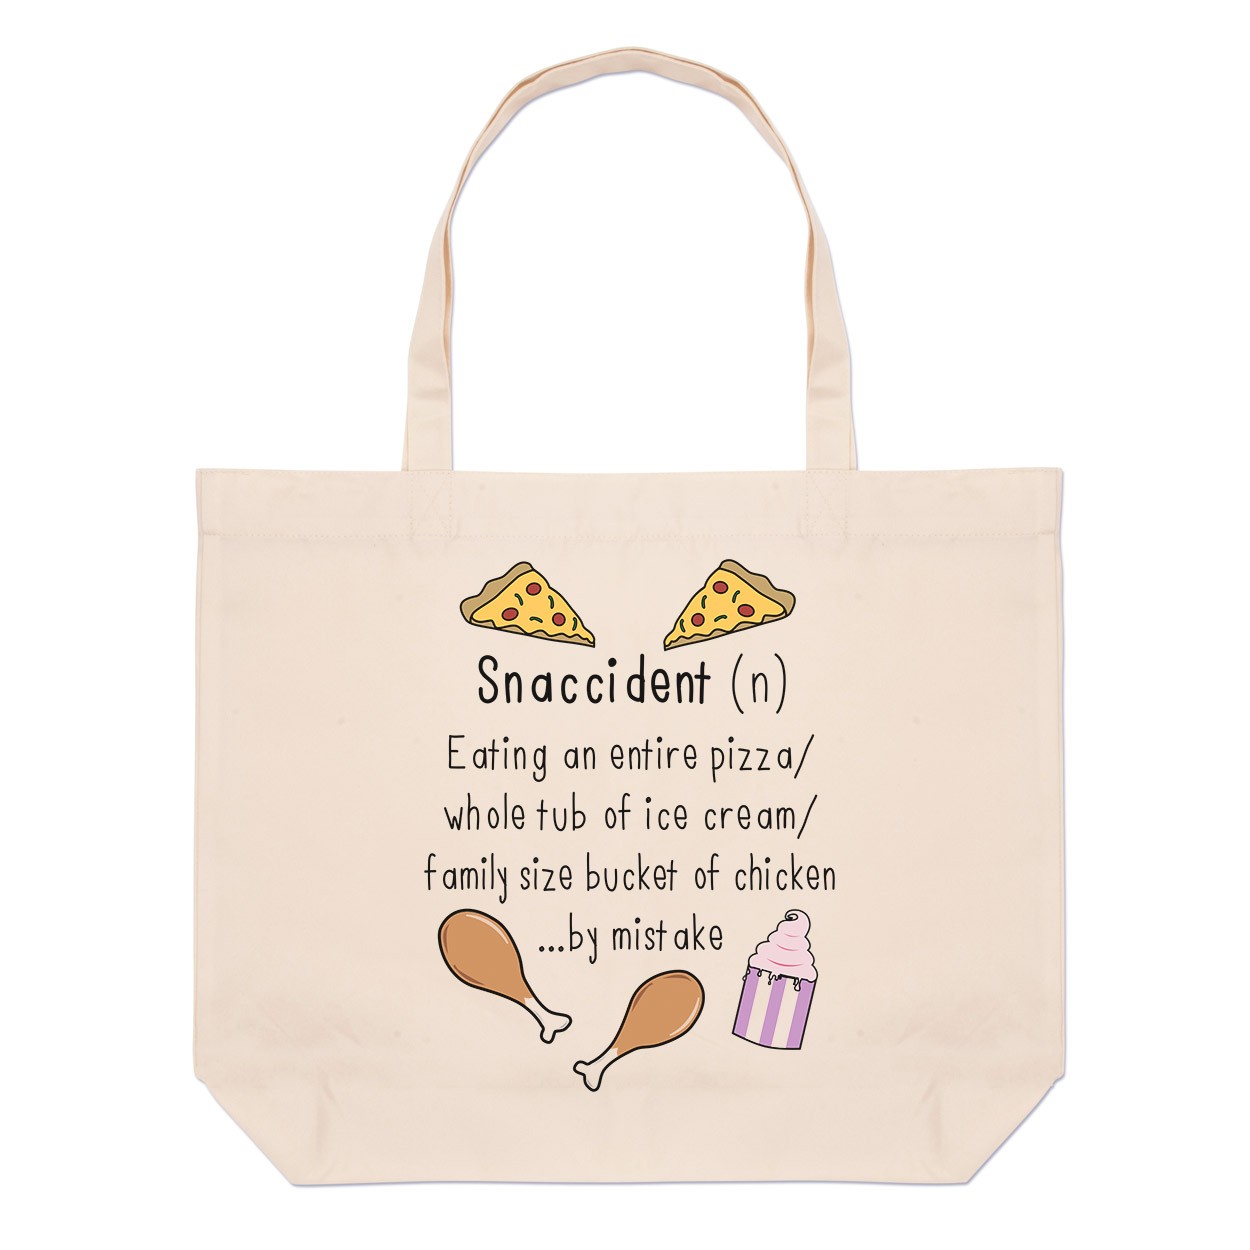 Snaccident Definition Large Beach Tote Bag